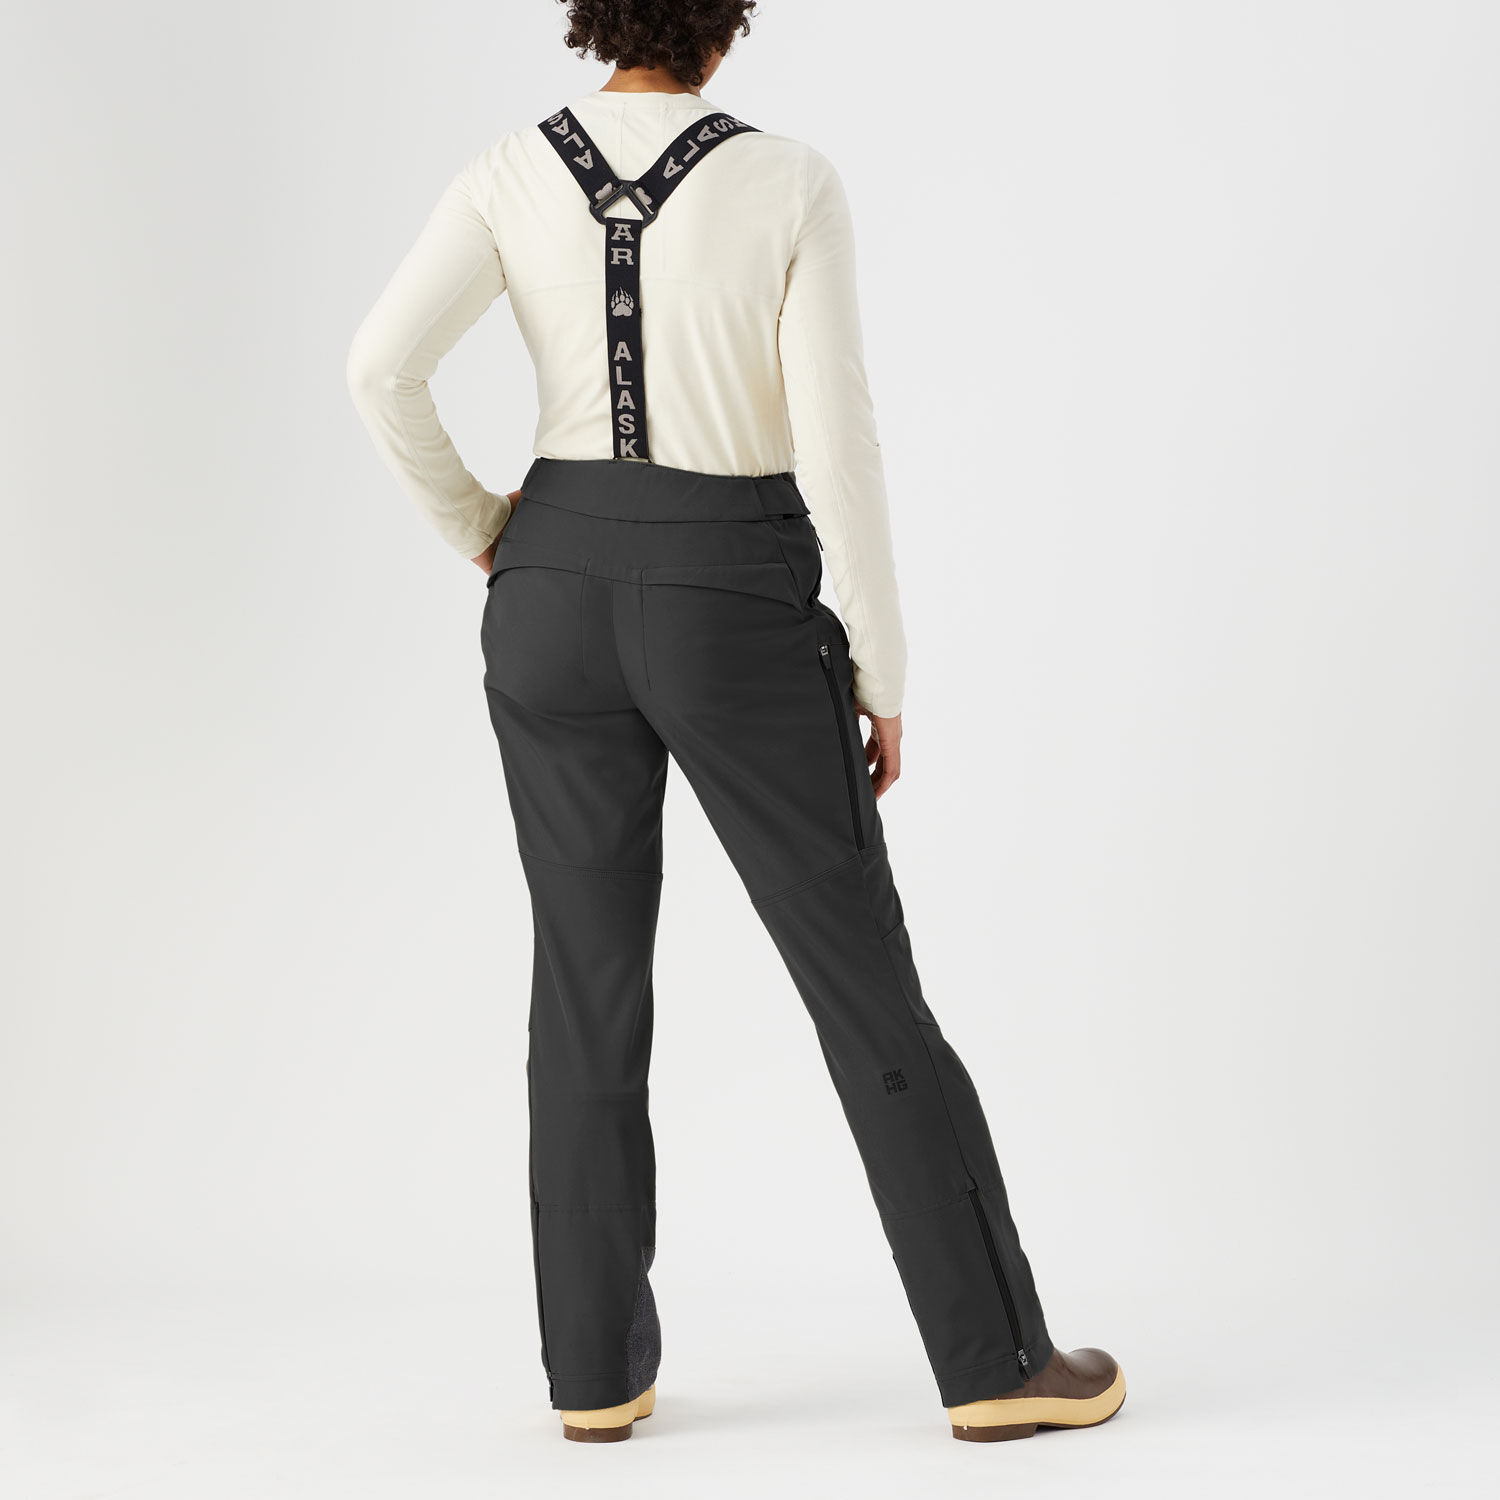 Black High Waisted Suspender Trousers | Vintage Inspired Fashion &  Accessories | 40s and 50s Clothing and Rockabilly Collection | 1940s, 1950s  Dresses Tops Cardigans Trousers